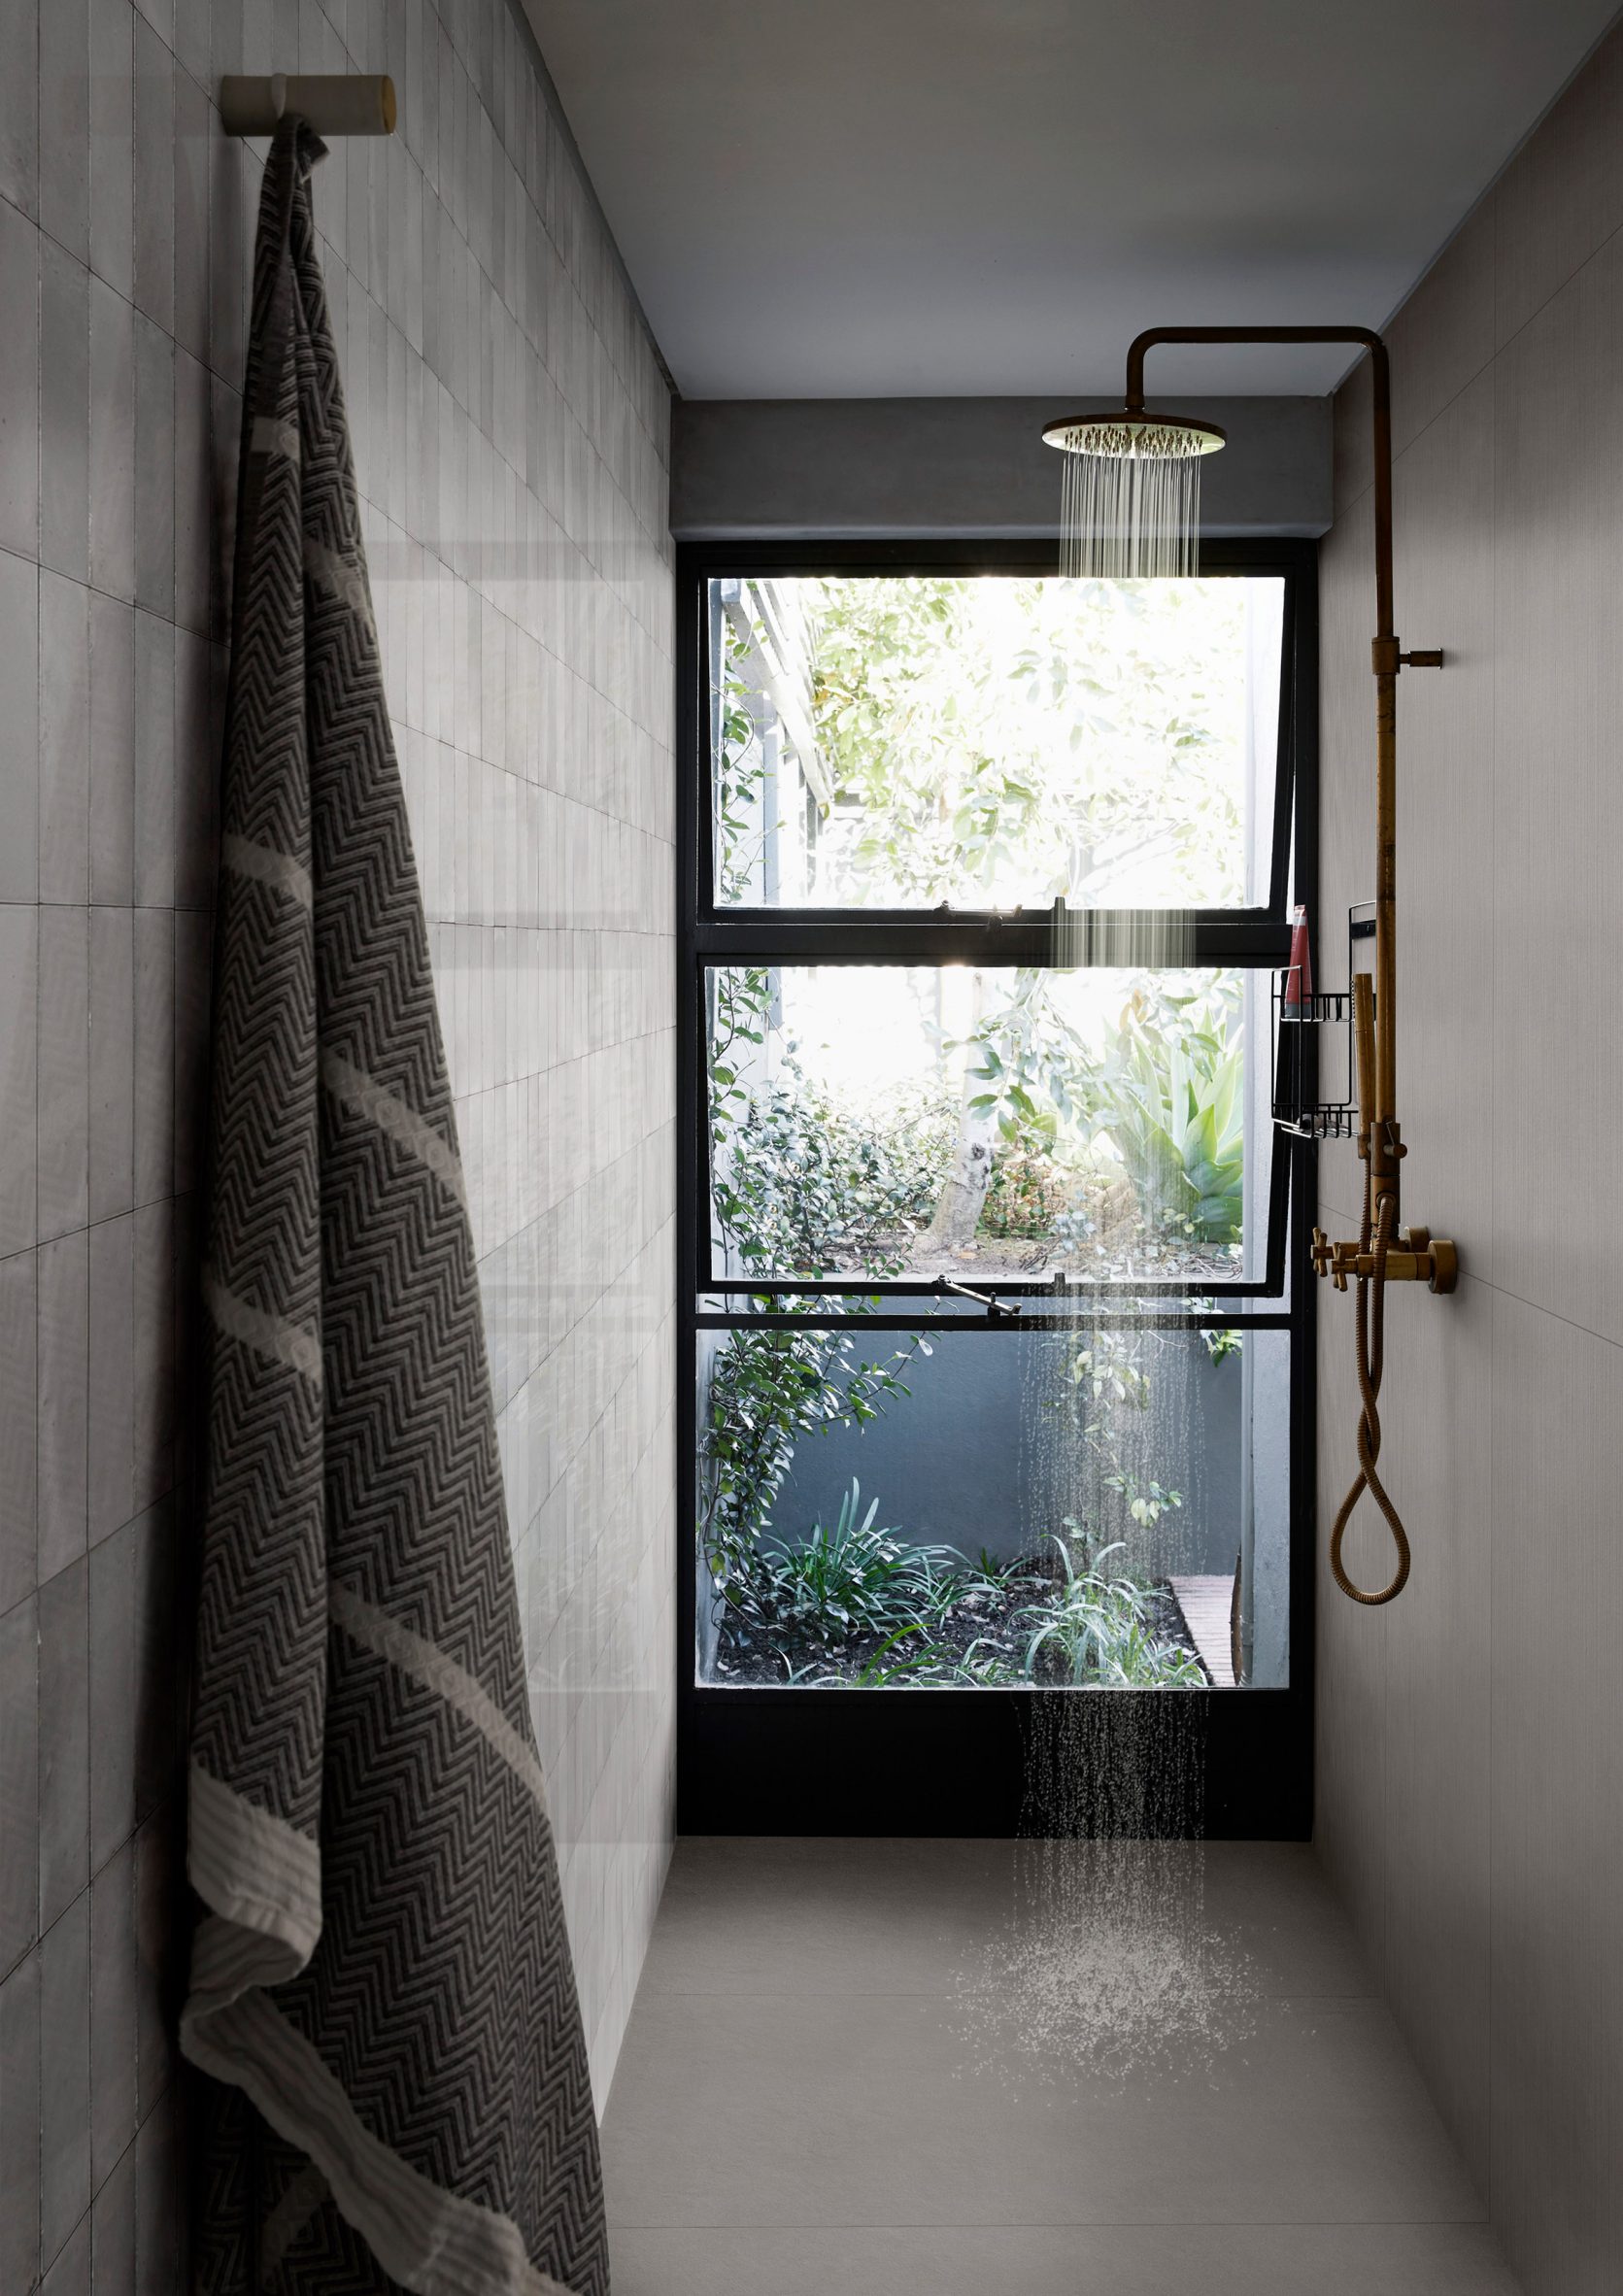 A photograph of the grey Cementum tiles used in a bathroom